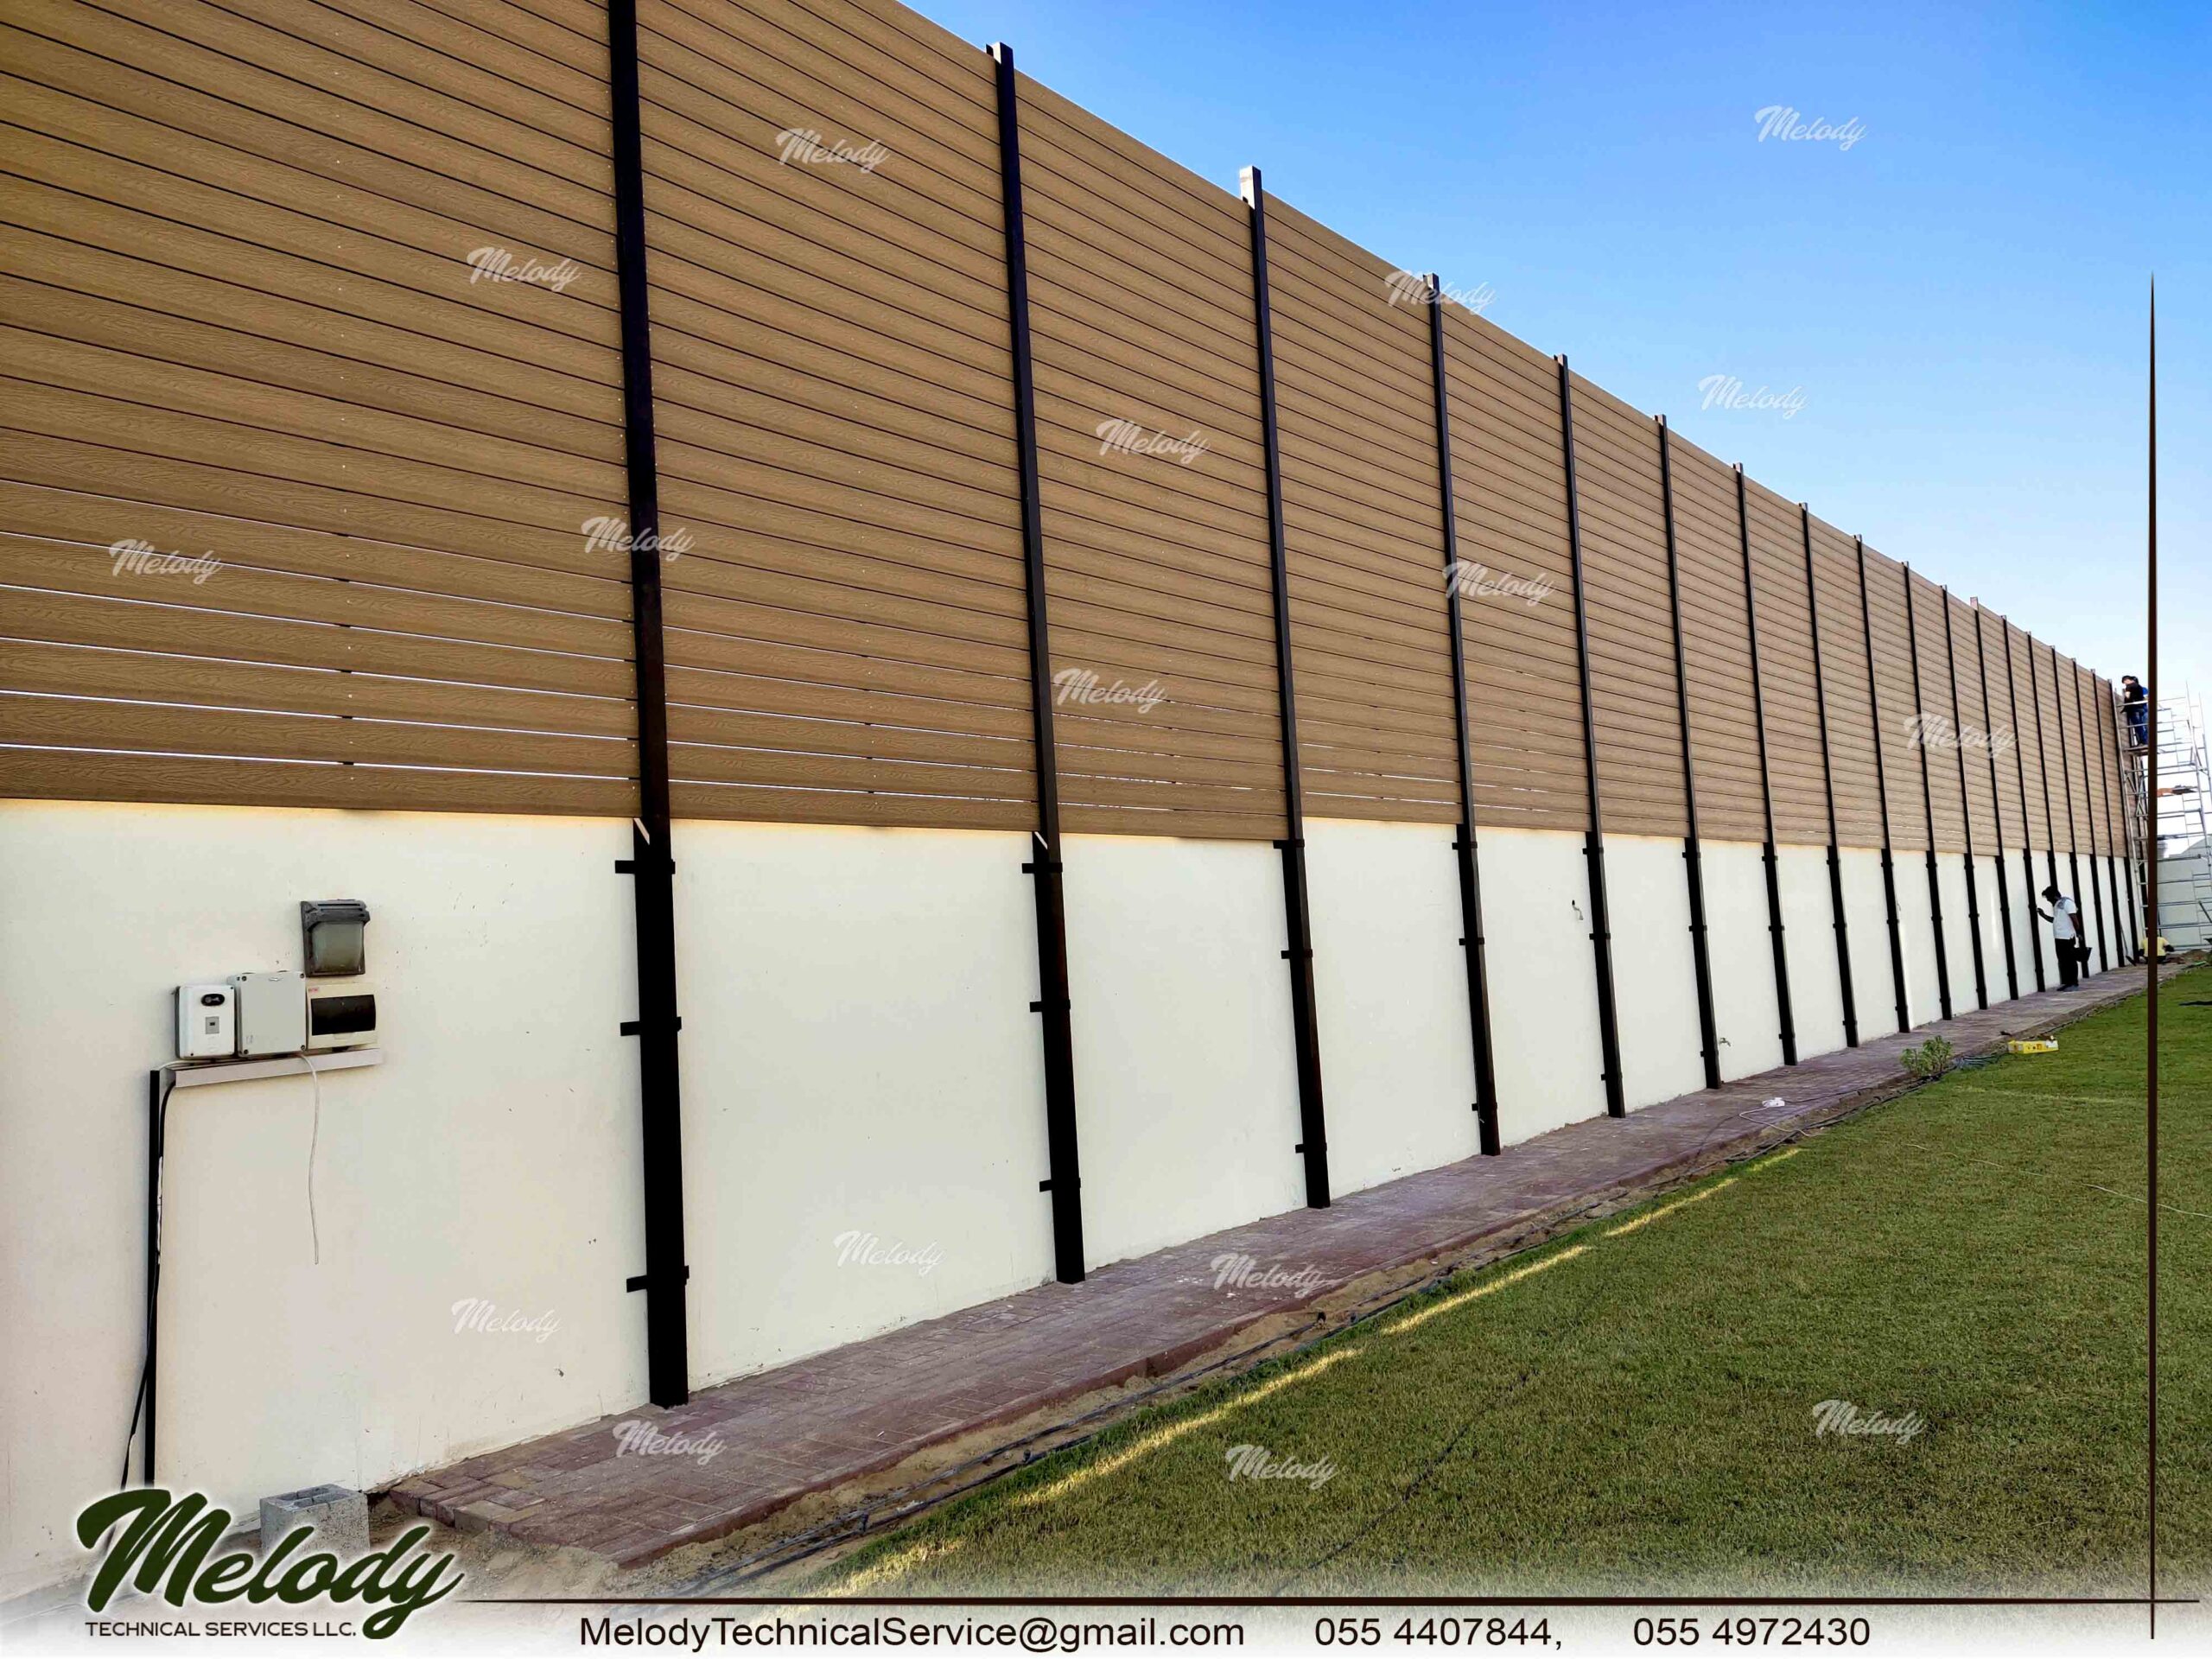 The Best WPC Fence Provider in Dubai - Suppliers (4).jpg